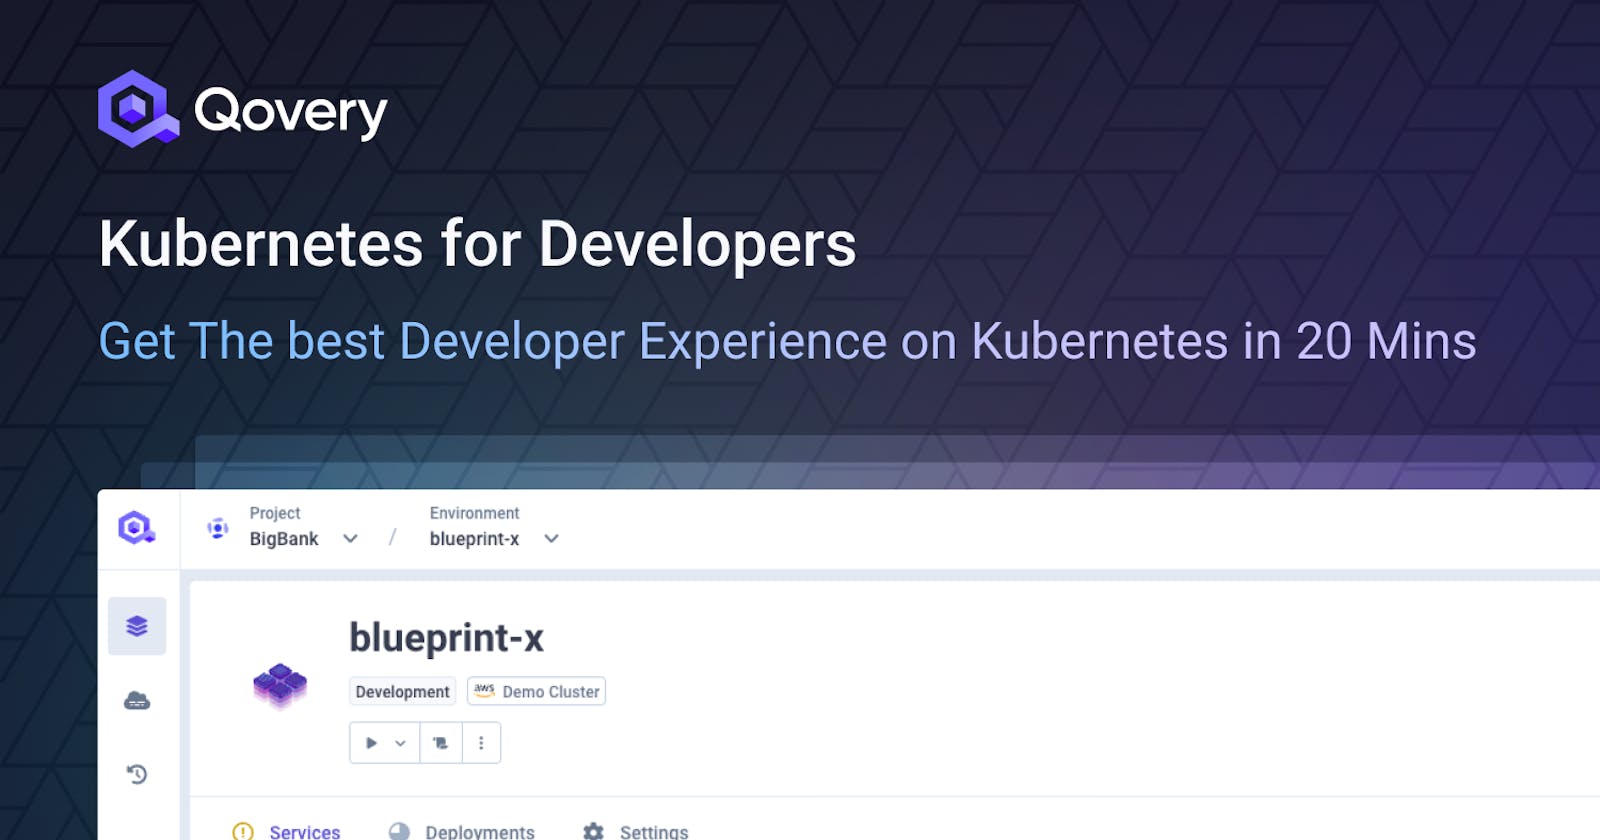 Kubernetes for Developers with Qovery